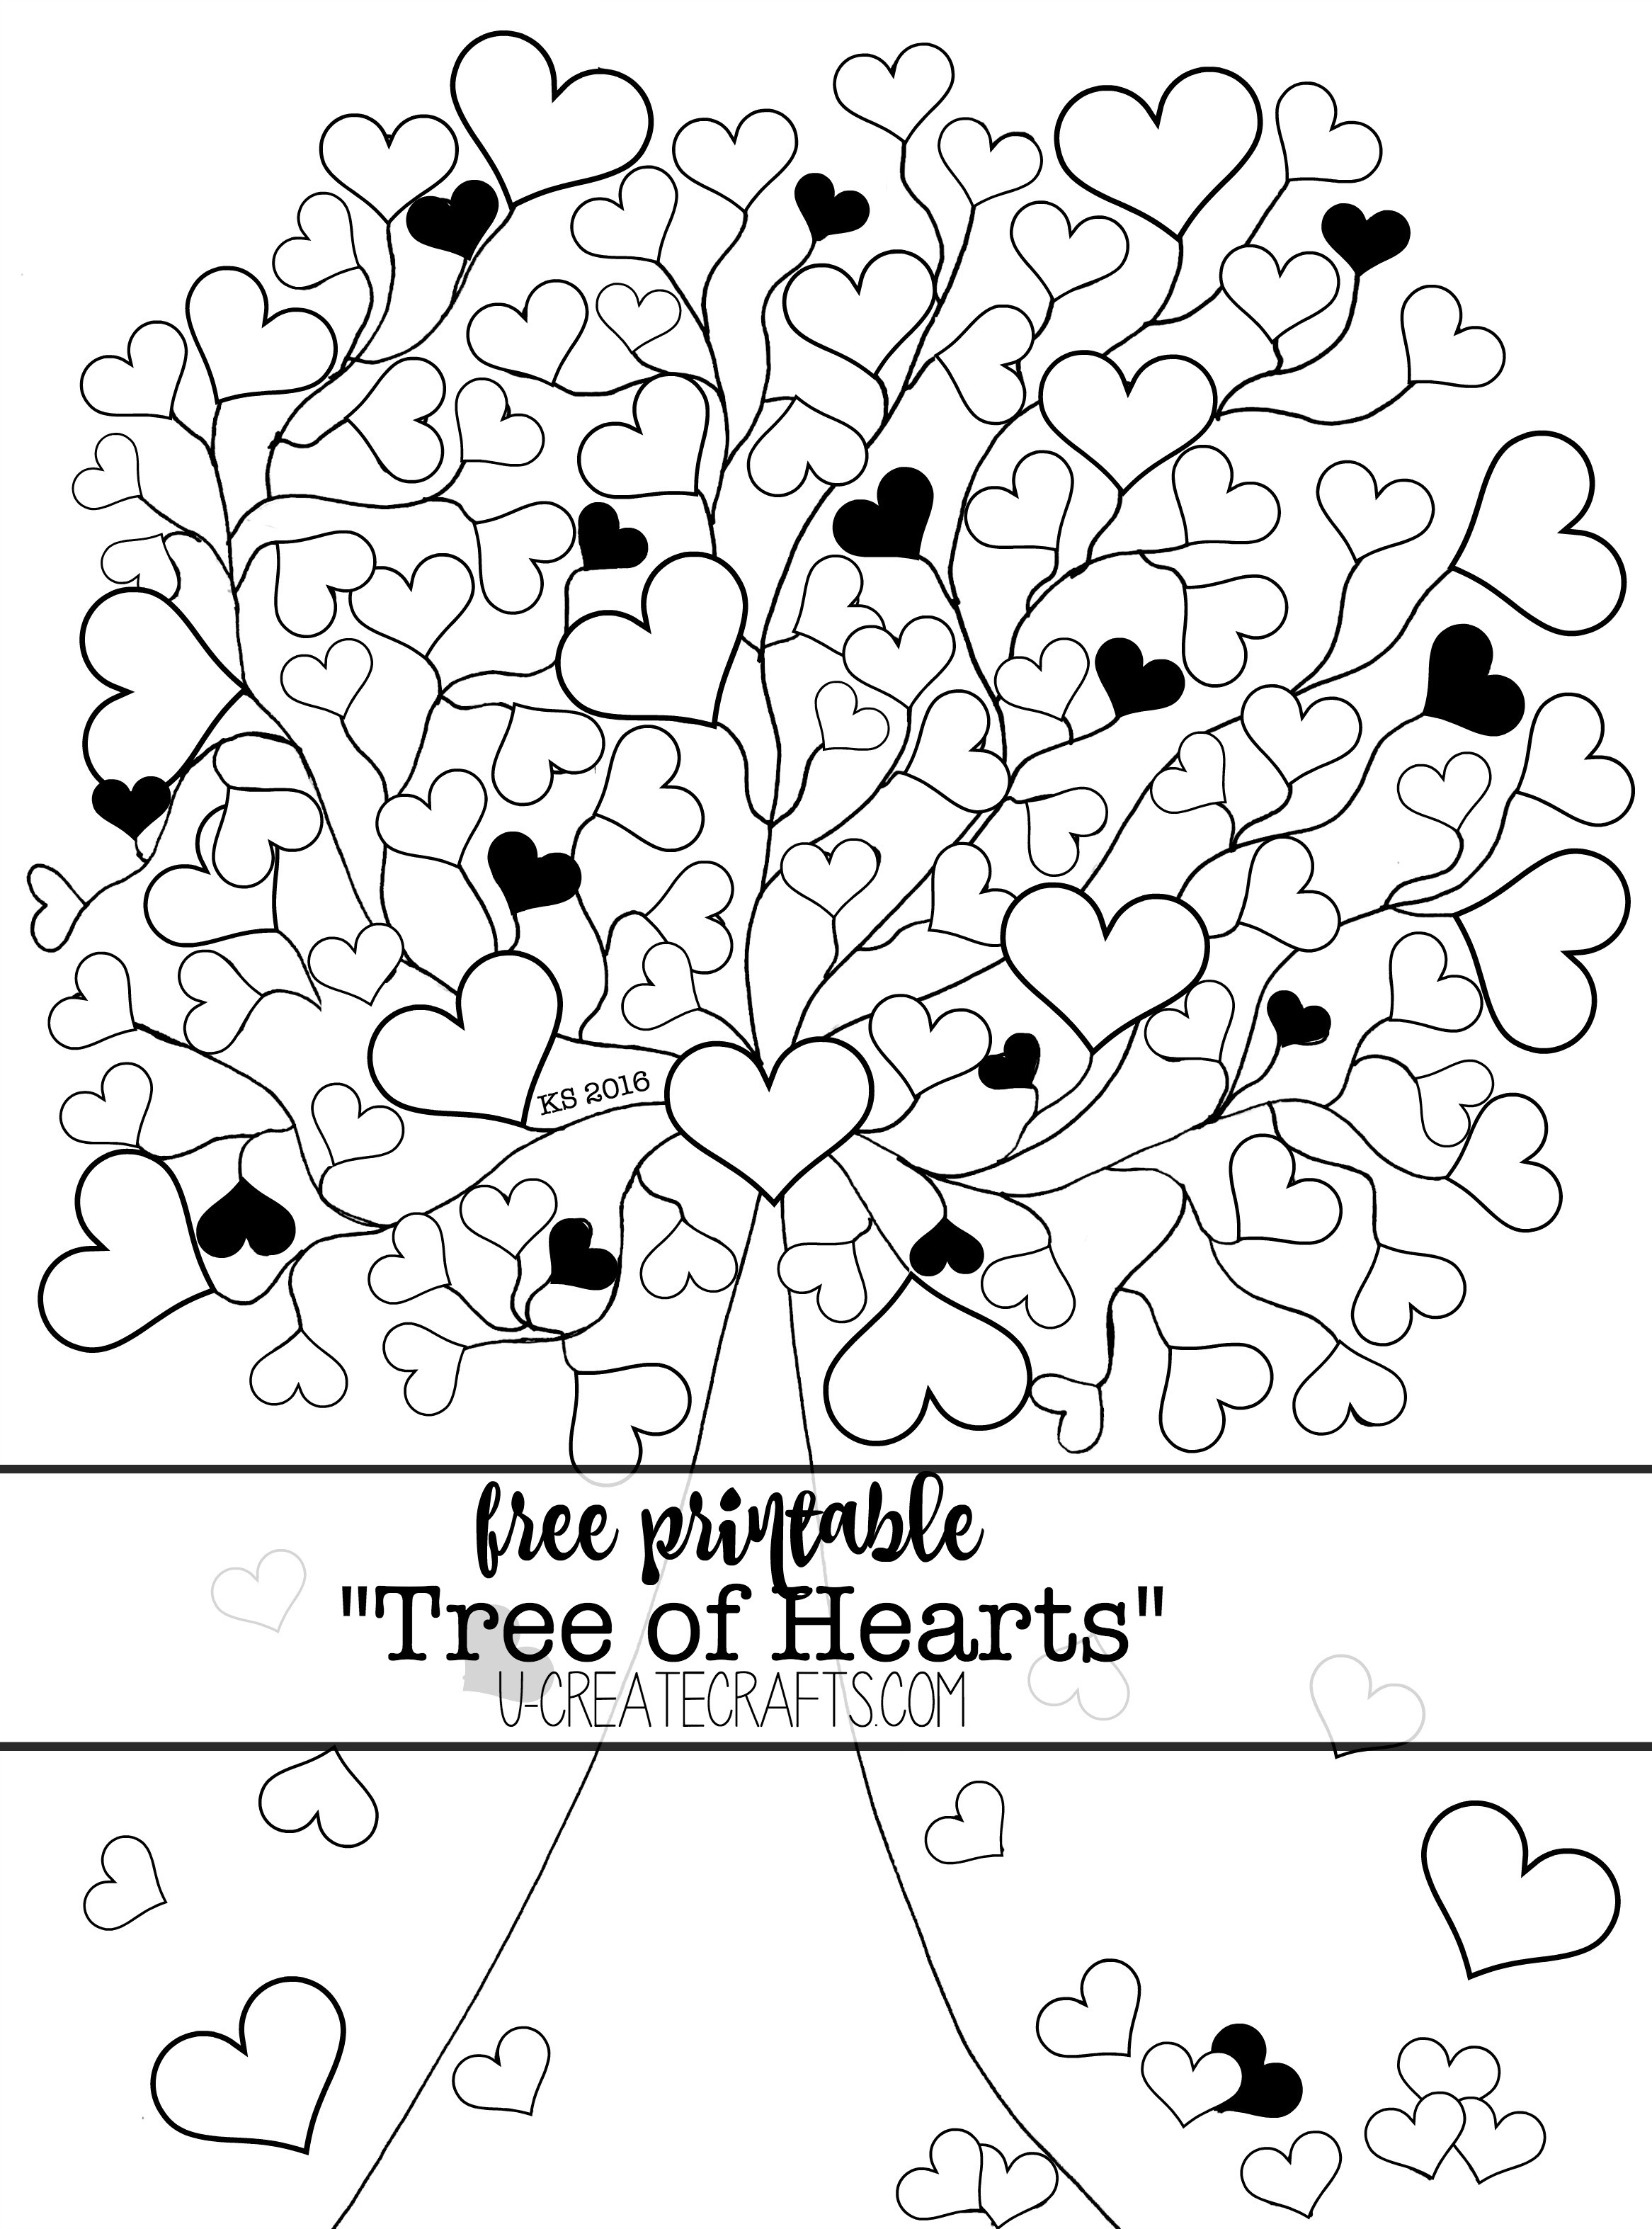 Tree of Hearts Coloring Page by U Create